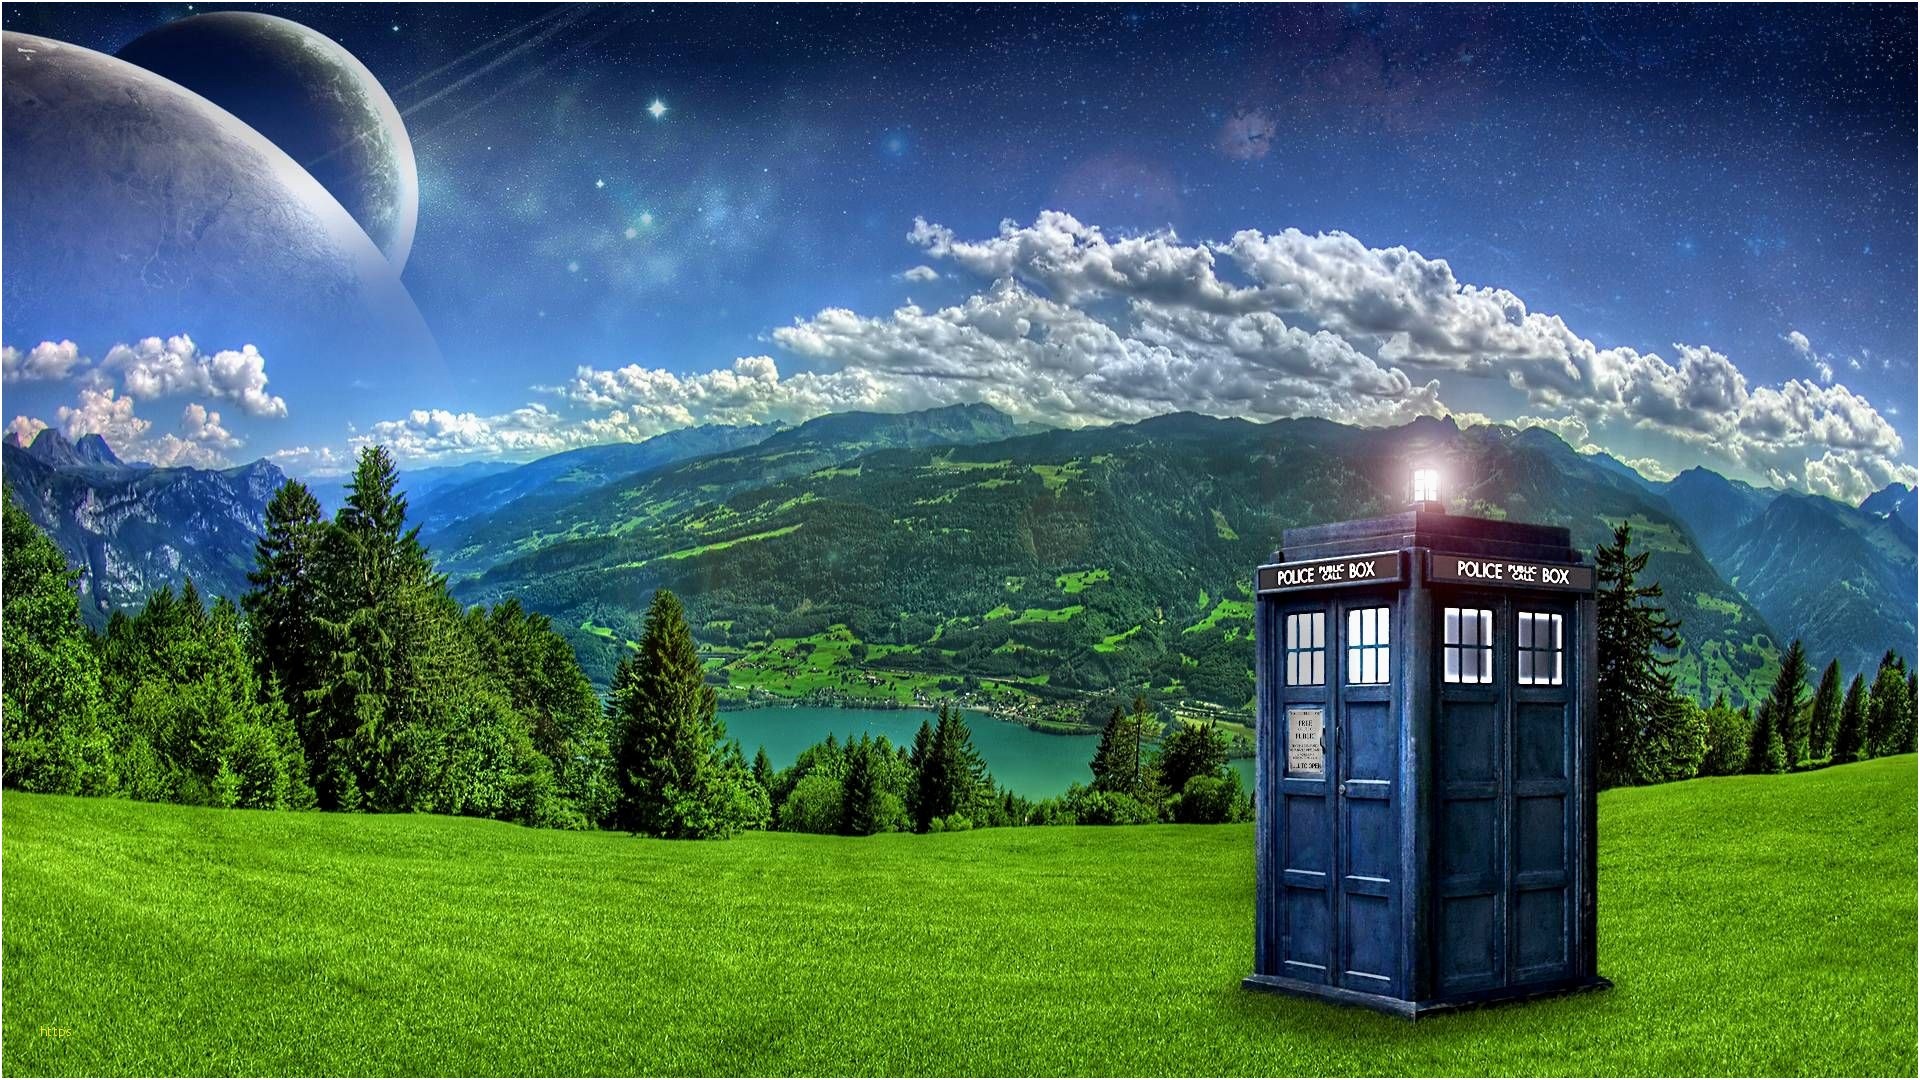 1920x1080 ... Tardis IPhone Wallpaper Inspirational Collection Of Doctor Who Tablet  Wallpaper On Hdwallpapers 1920—1080 ...